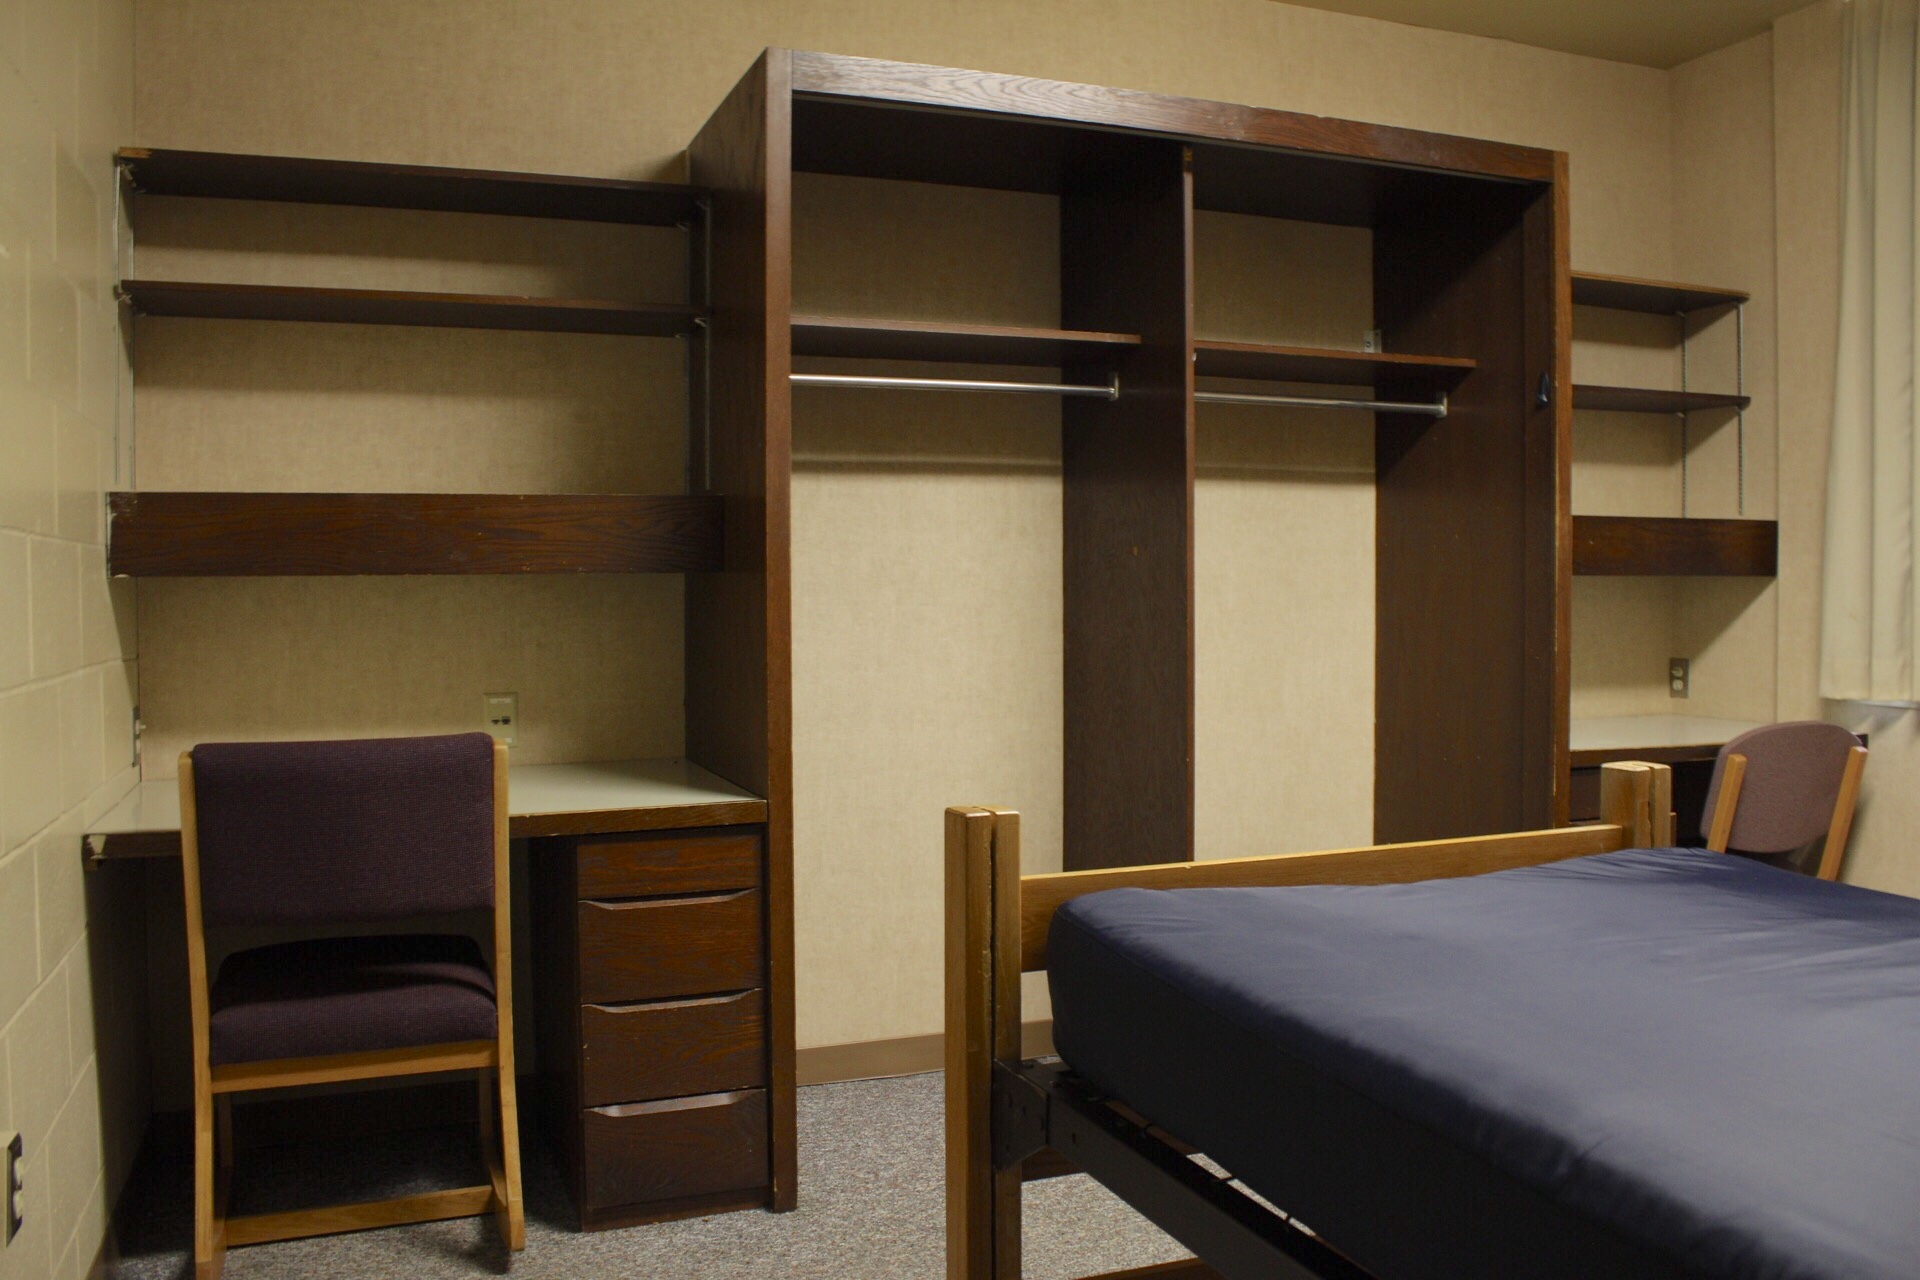 Centennial Complex room with 2 desks, 2 chairs, 2 hanging clothing hutches, shelves and a bed frame and mattress.